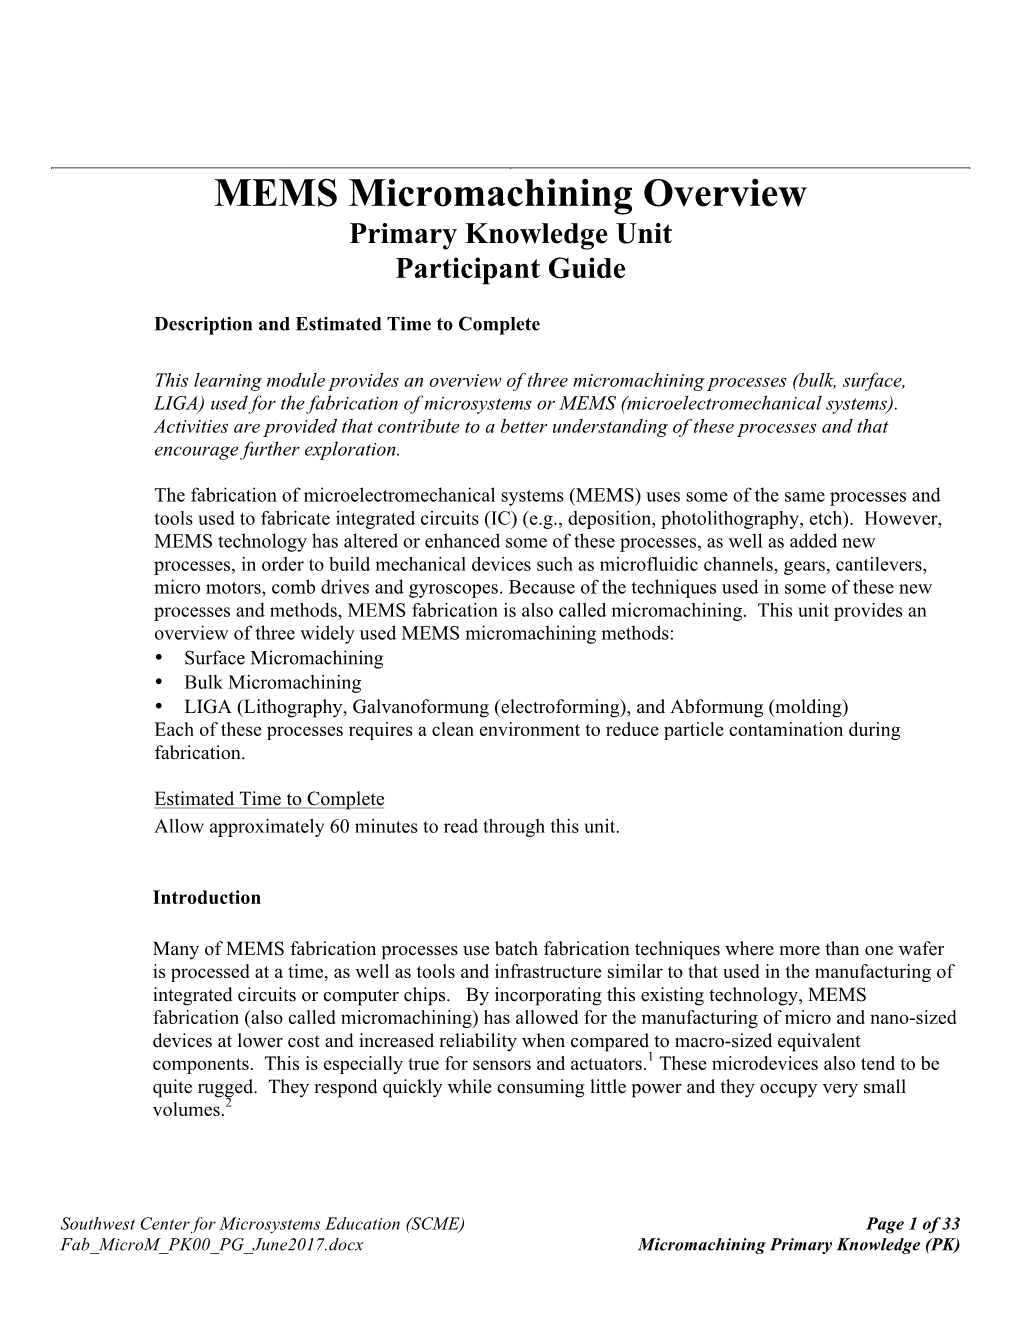 MEMS Micromachining Overview Primary Knowledge Unit Participant Guide